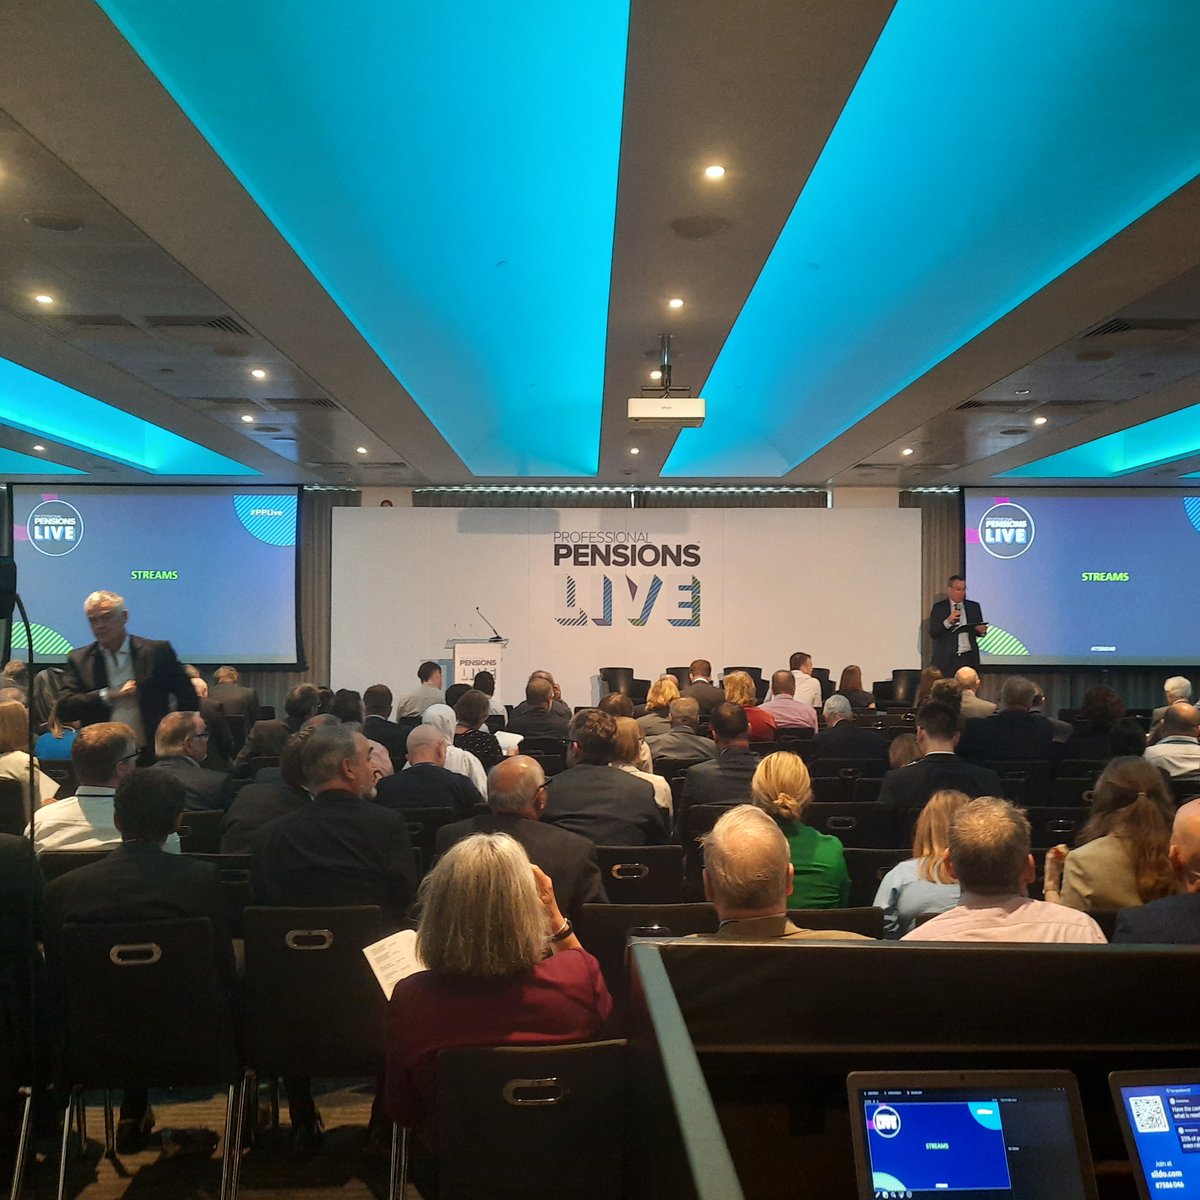 Thank you to @ProfPensions for the invite. Pleasure to chat on 'Single Code' w/ @h_williamsmith, Nicola Morgan @marksandspencer, Paul Tinslay, @DalriadaTrustee, & Helen Miles @gunnercookellp @nhs_pensions. Next up, @ThePLSA investment conf! Be there! #pensionstogether #anewboost